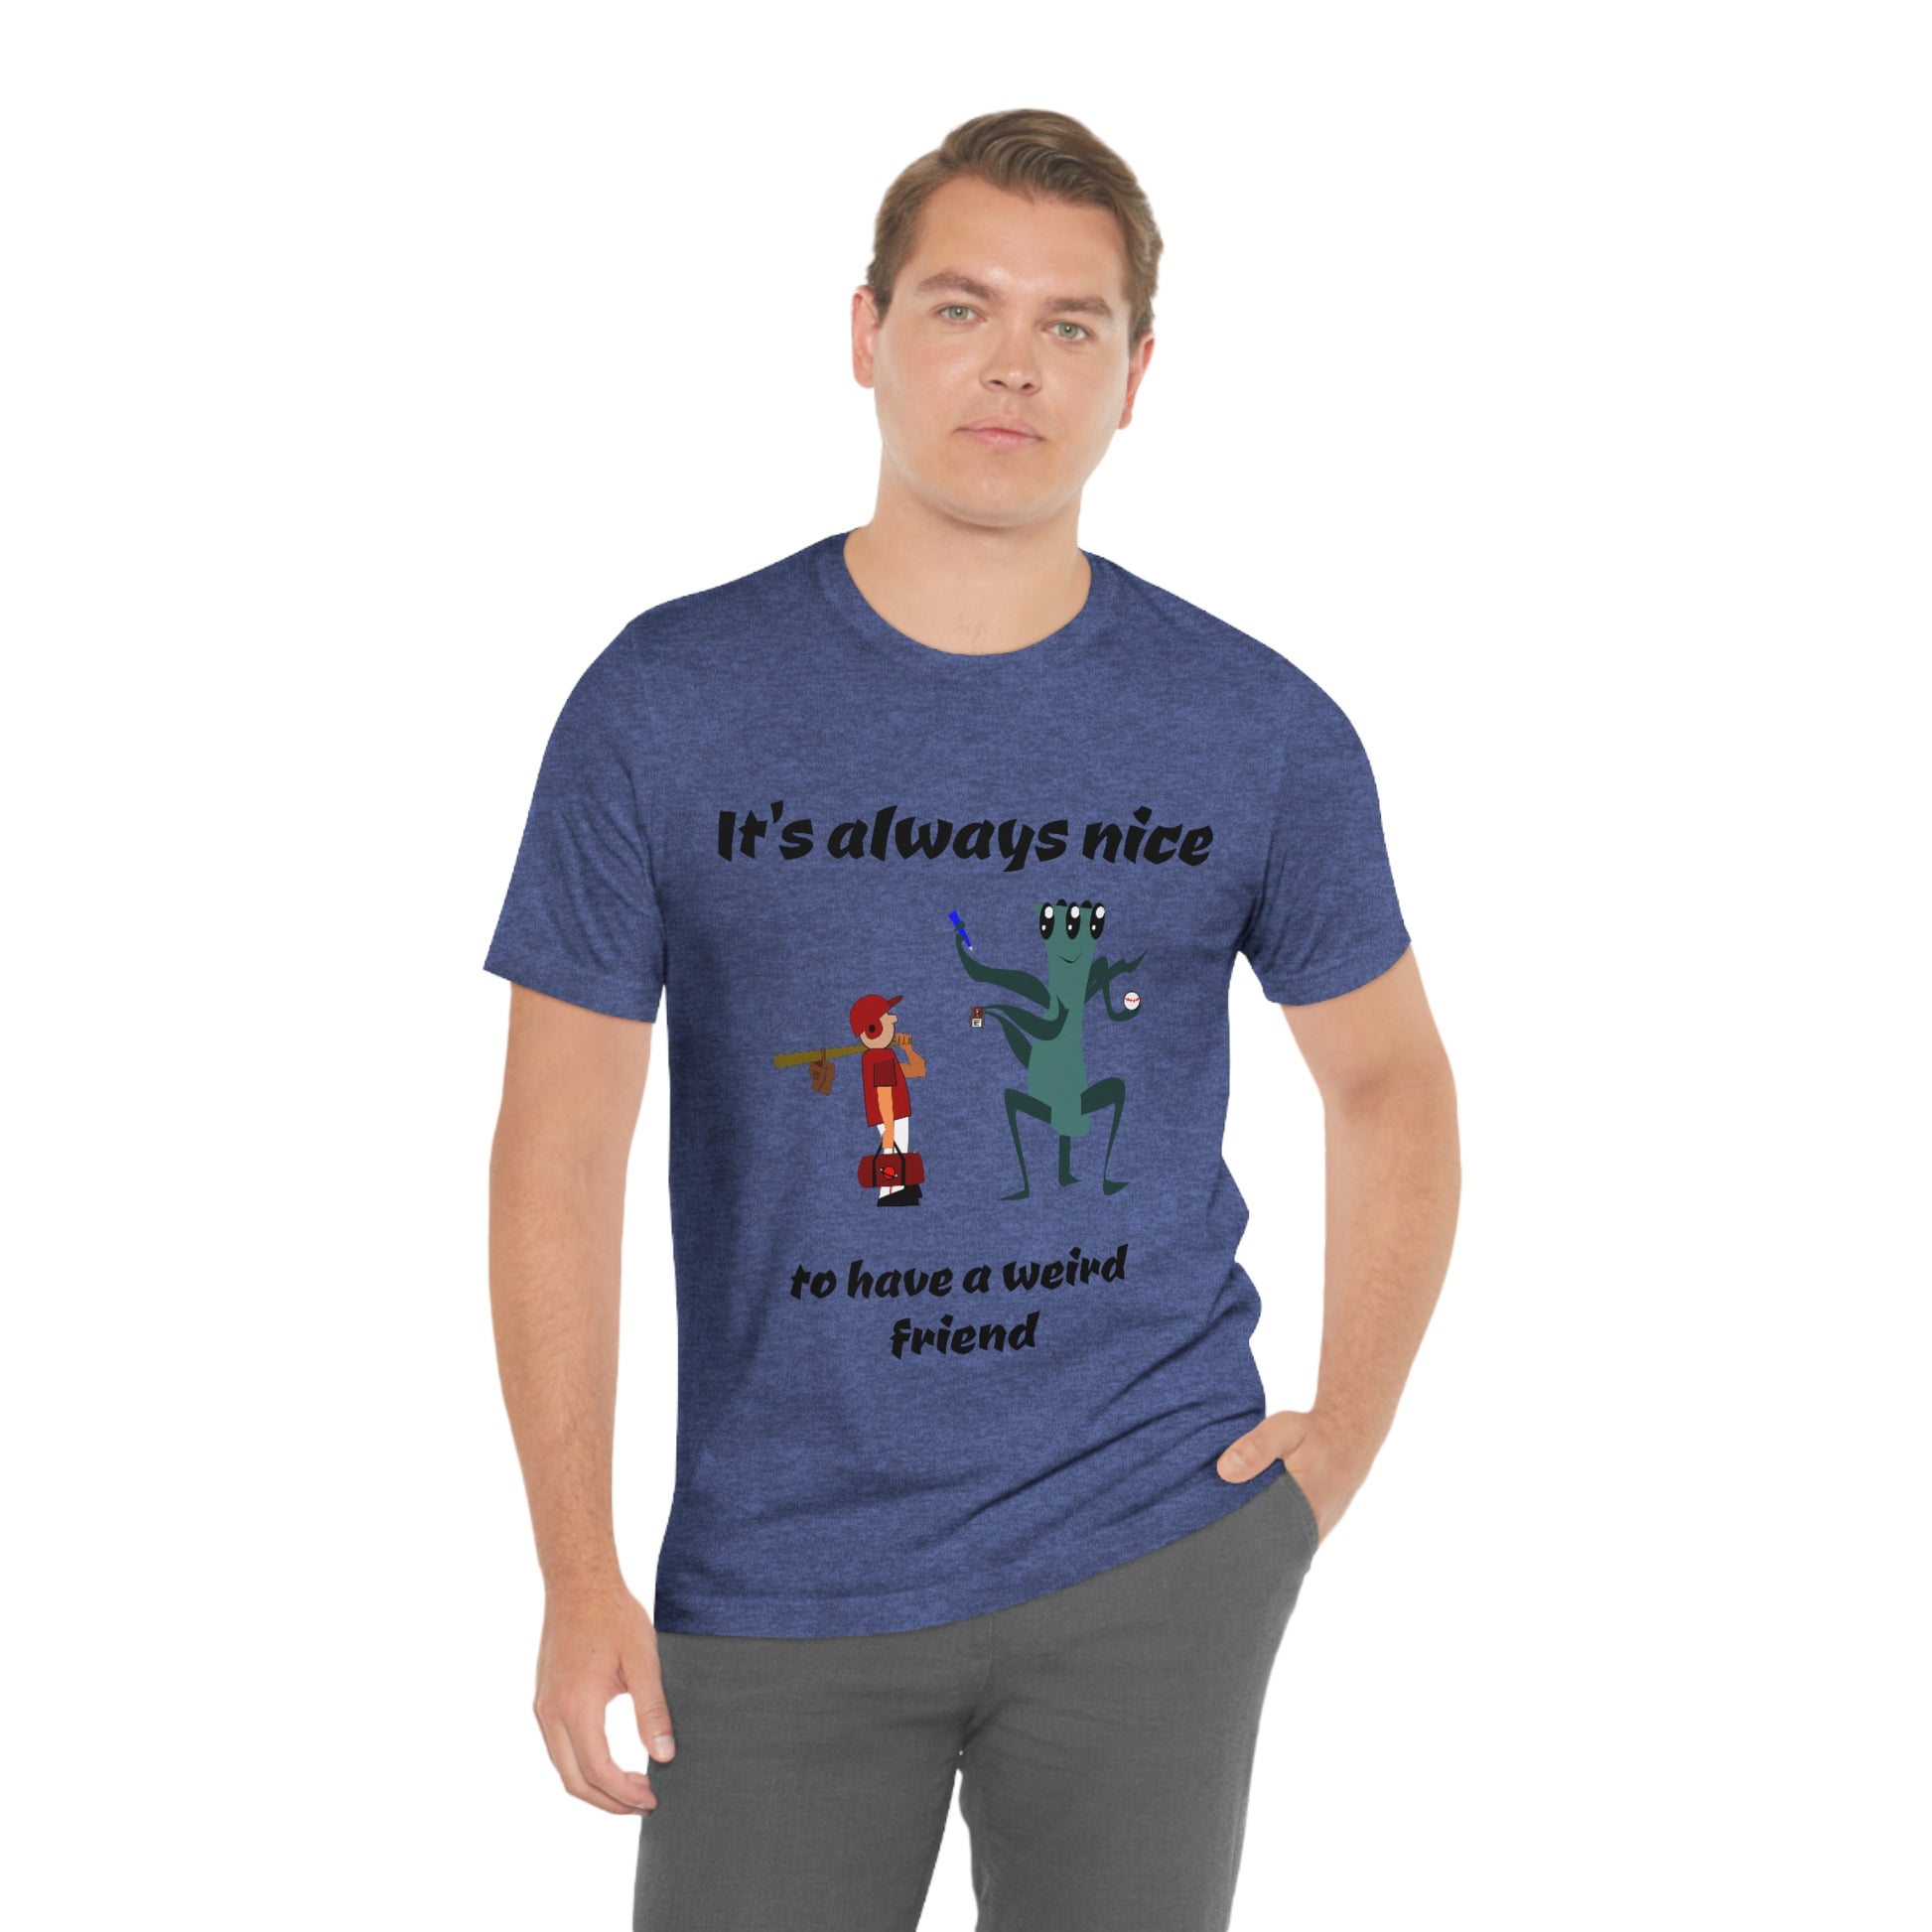 It's always nice to have a weird friend - Funny - Unisex Short Sleeve Tee - CrazyTomTShirts